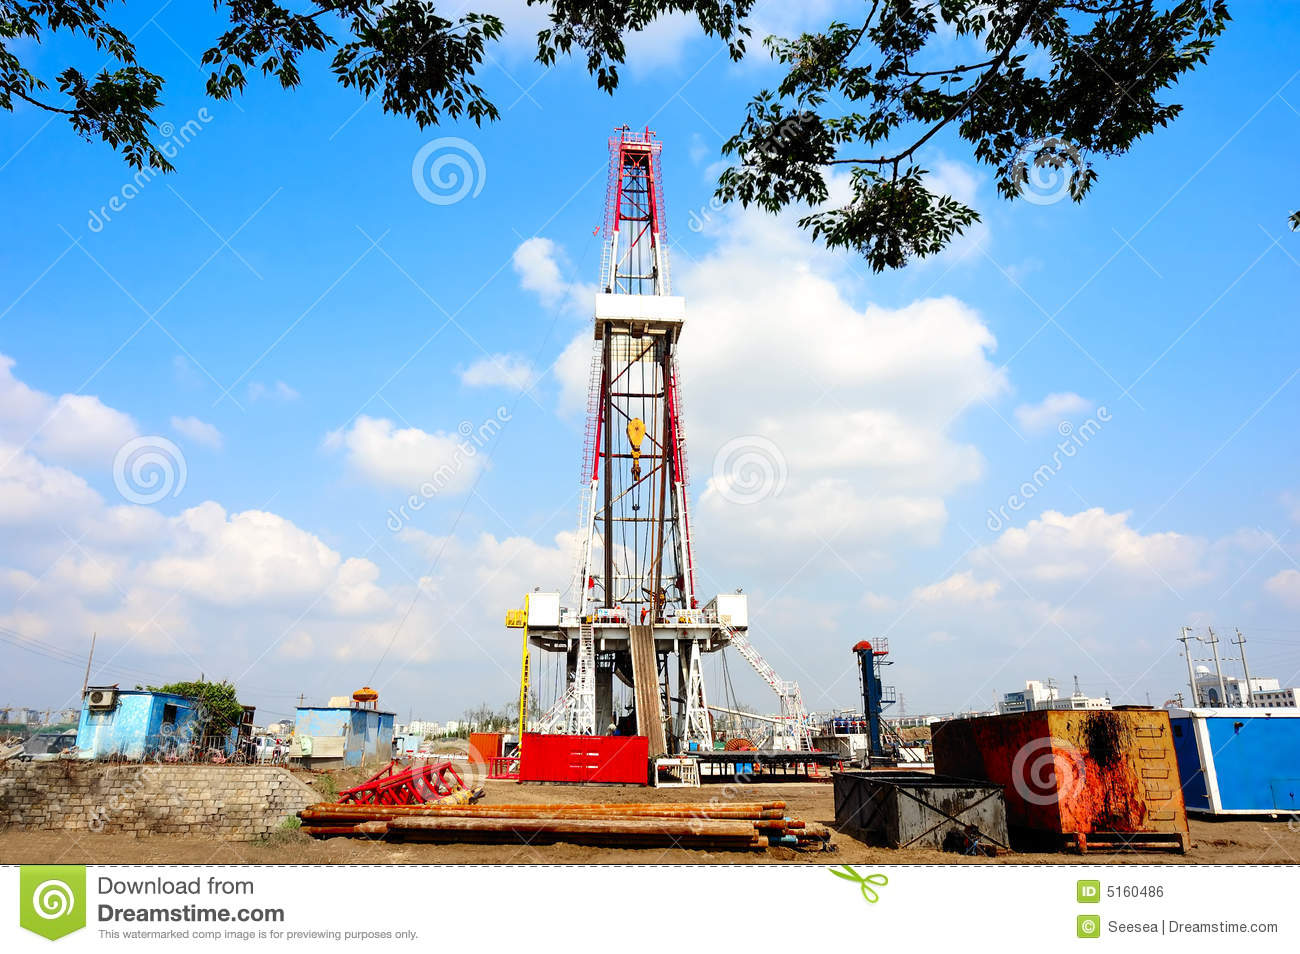 Drilling Rig Royalty Free Stock Image   Image  5160486